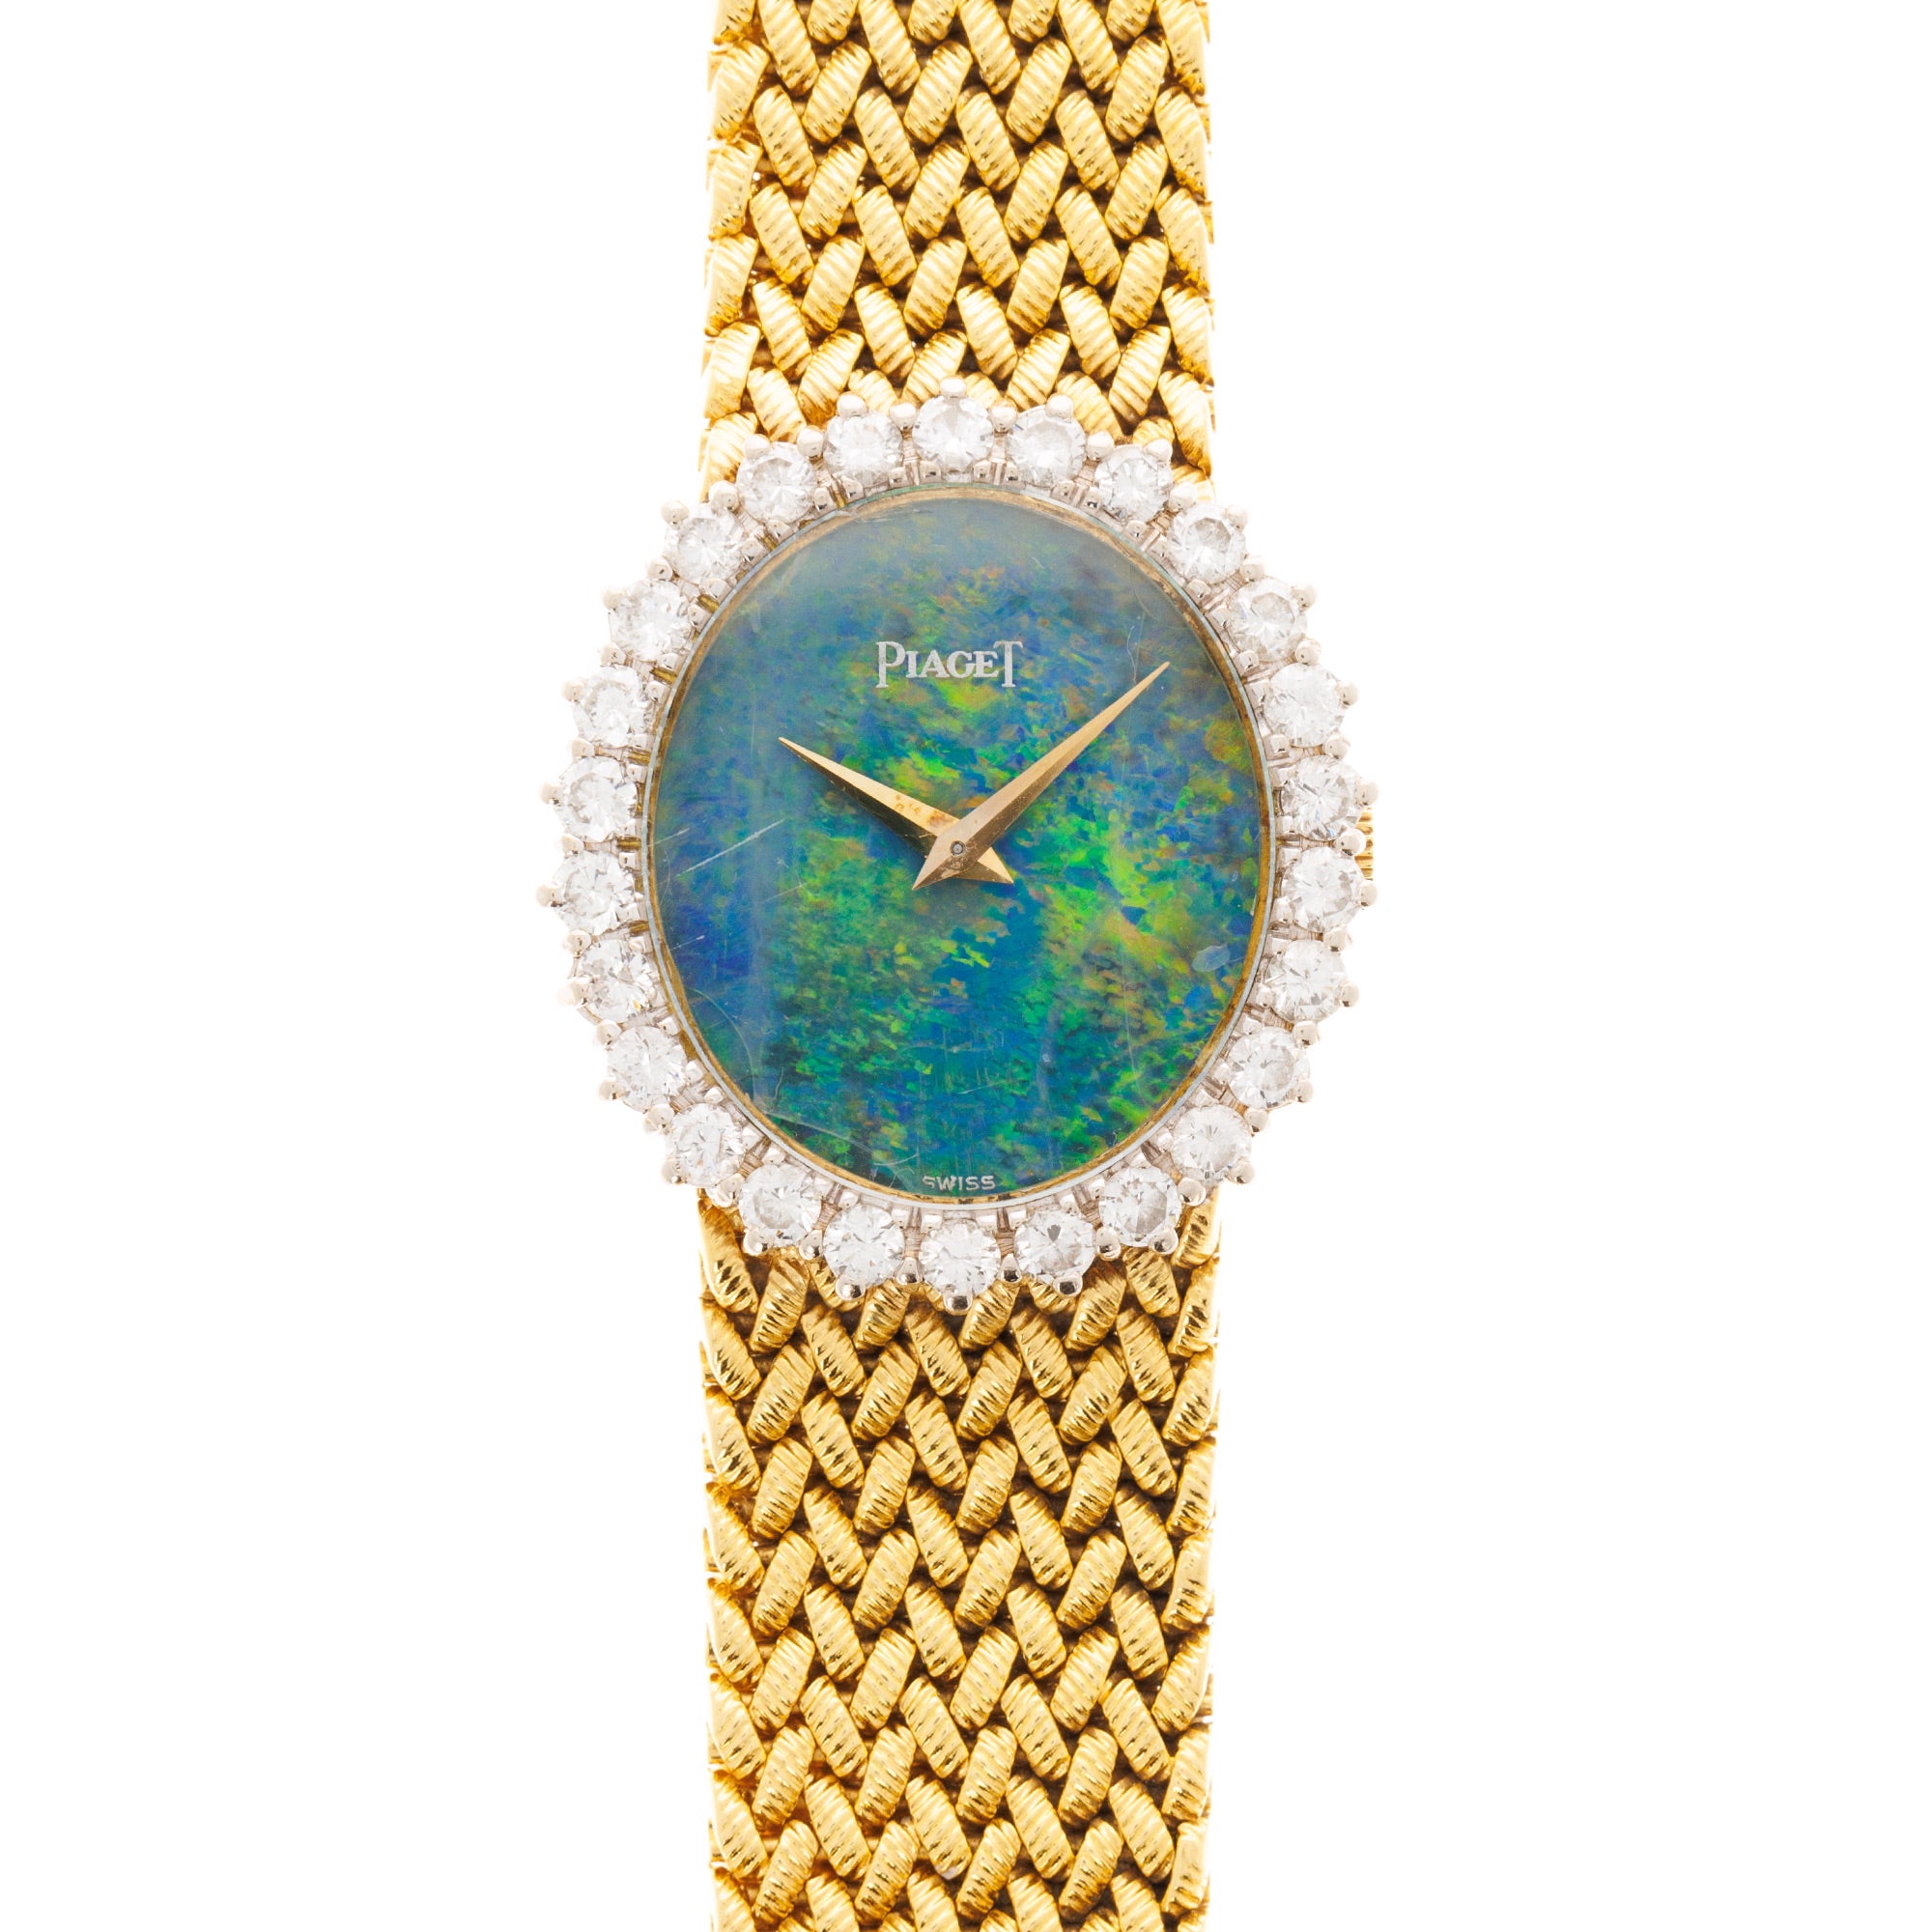 Piaget - Piaget Yellow Gold and Opal Watch - The Keystone Watches